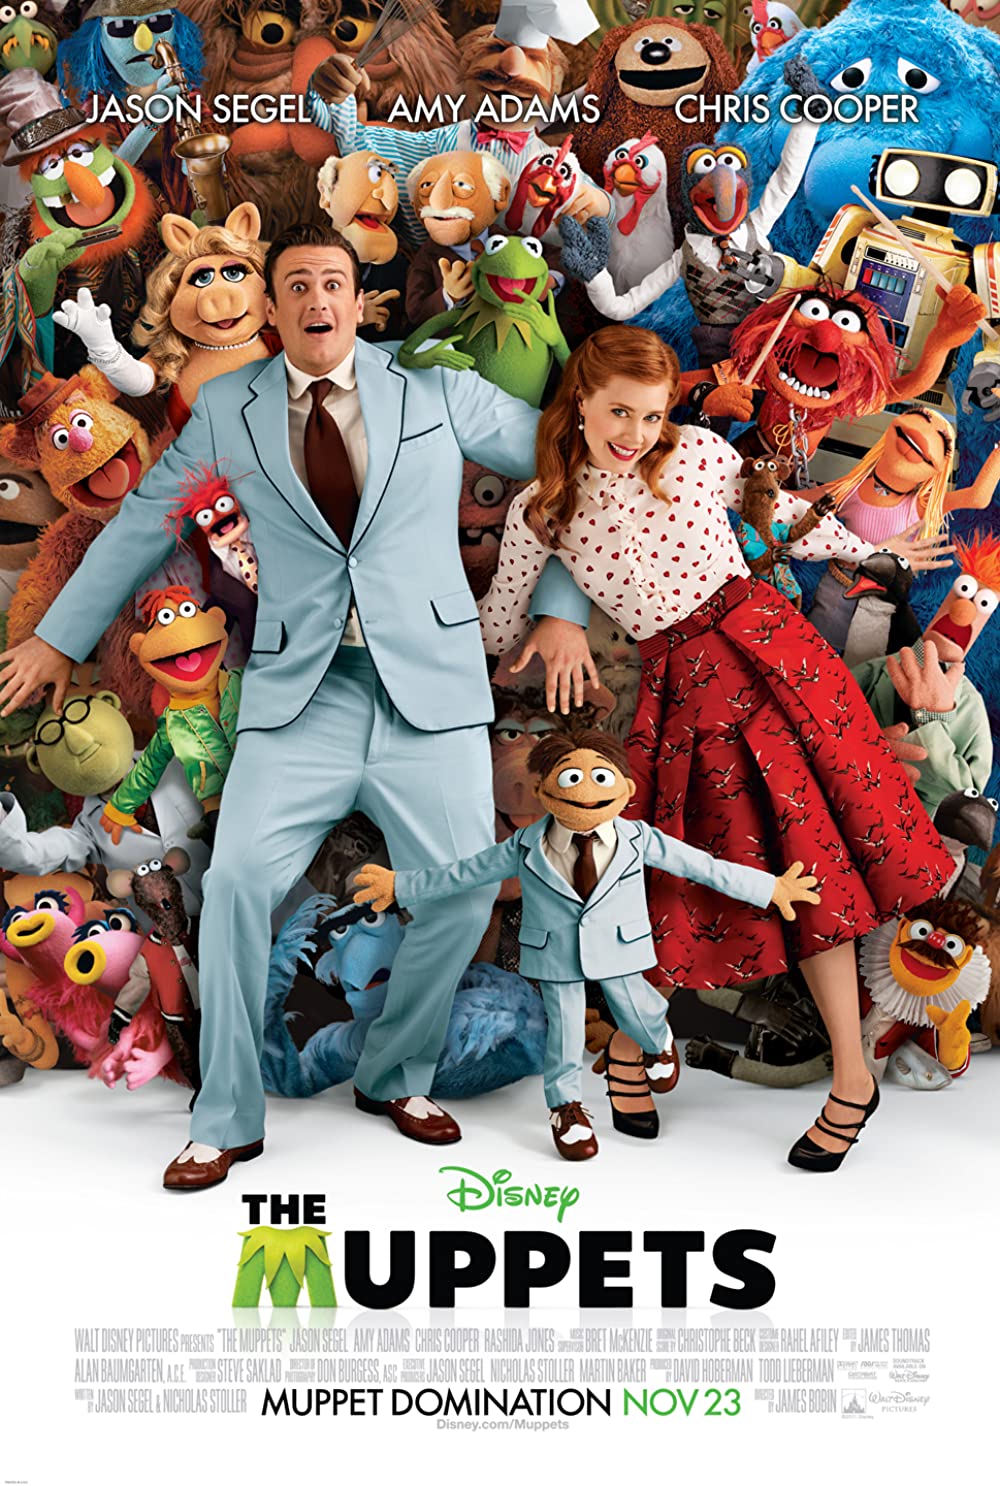 THE MUPPETS (2012)